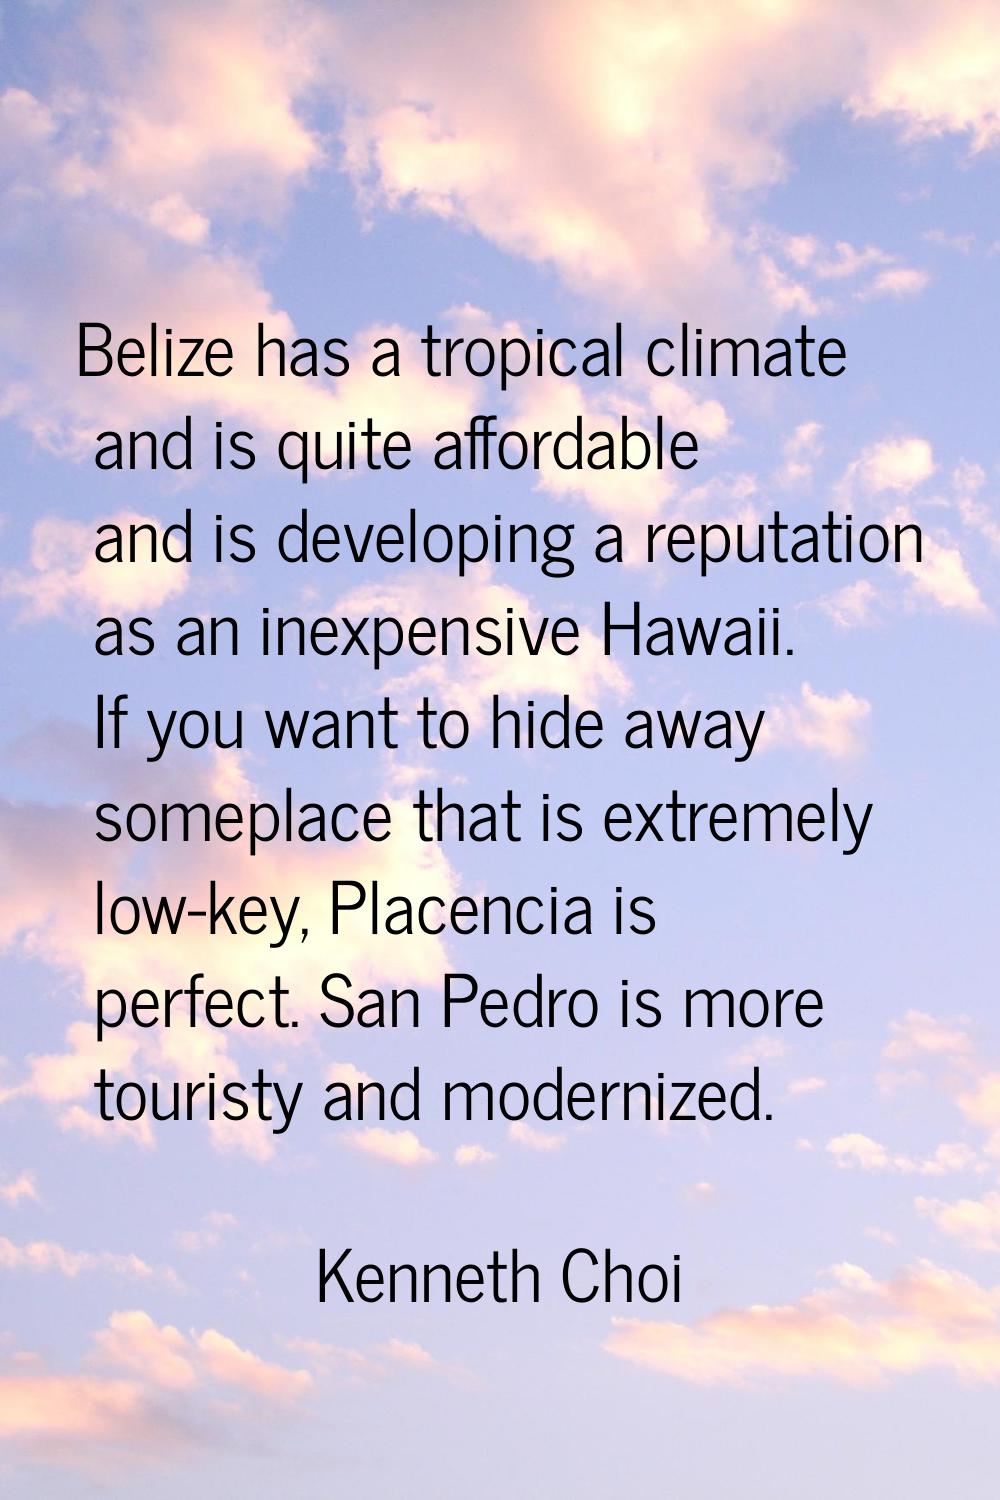 Belize has a tropical climate and is quite affordable and is developing a reputation as an inexpens